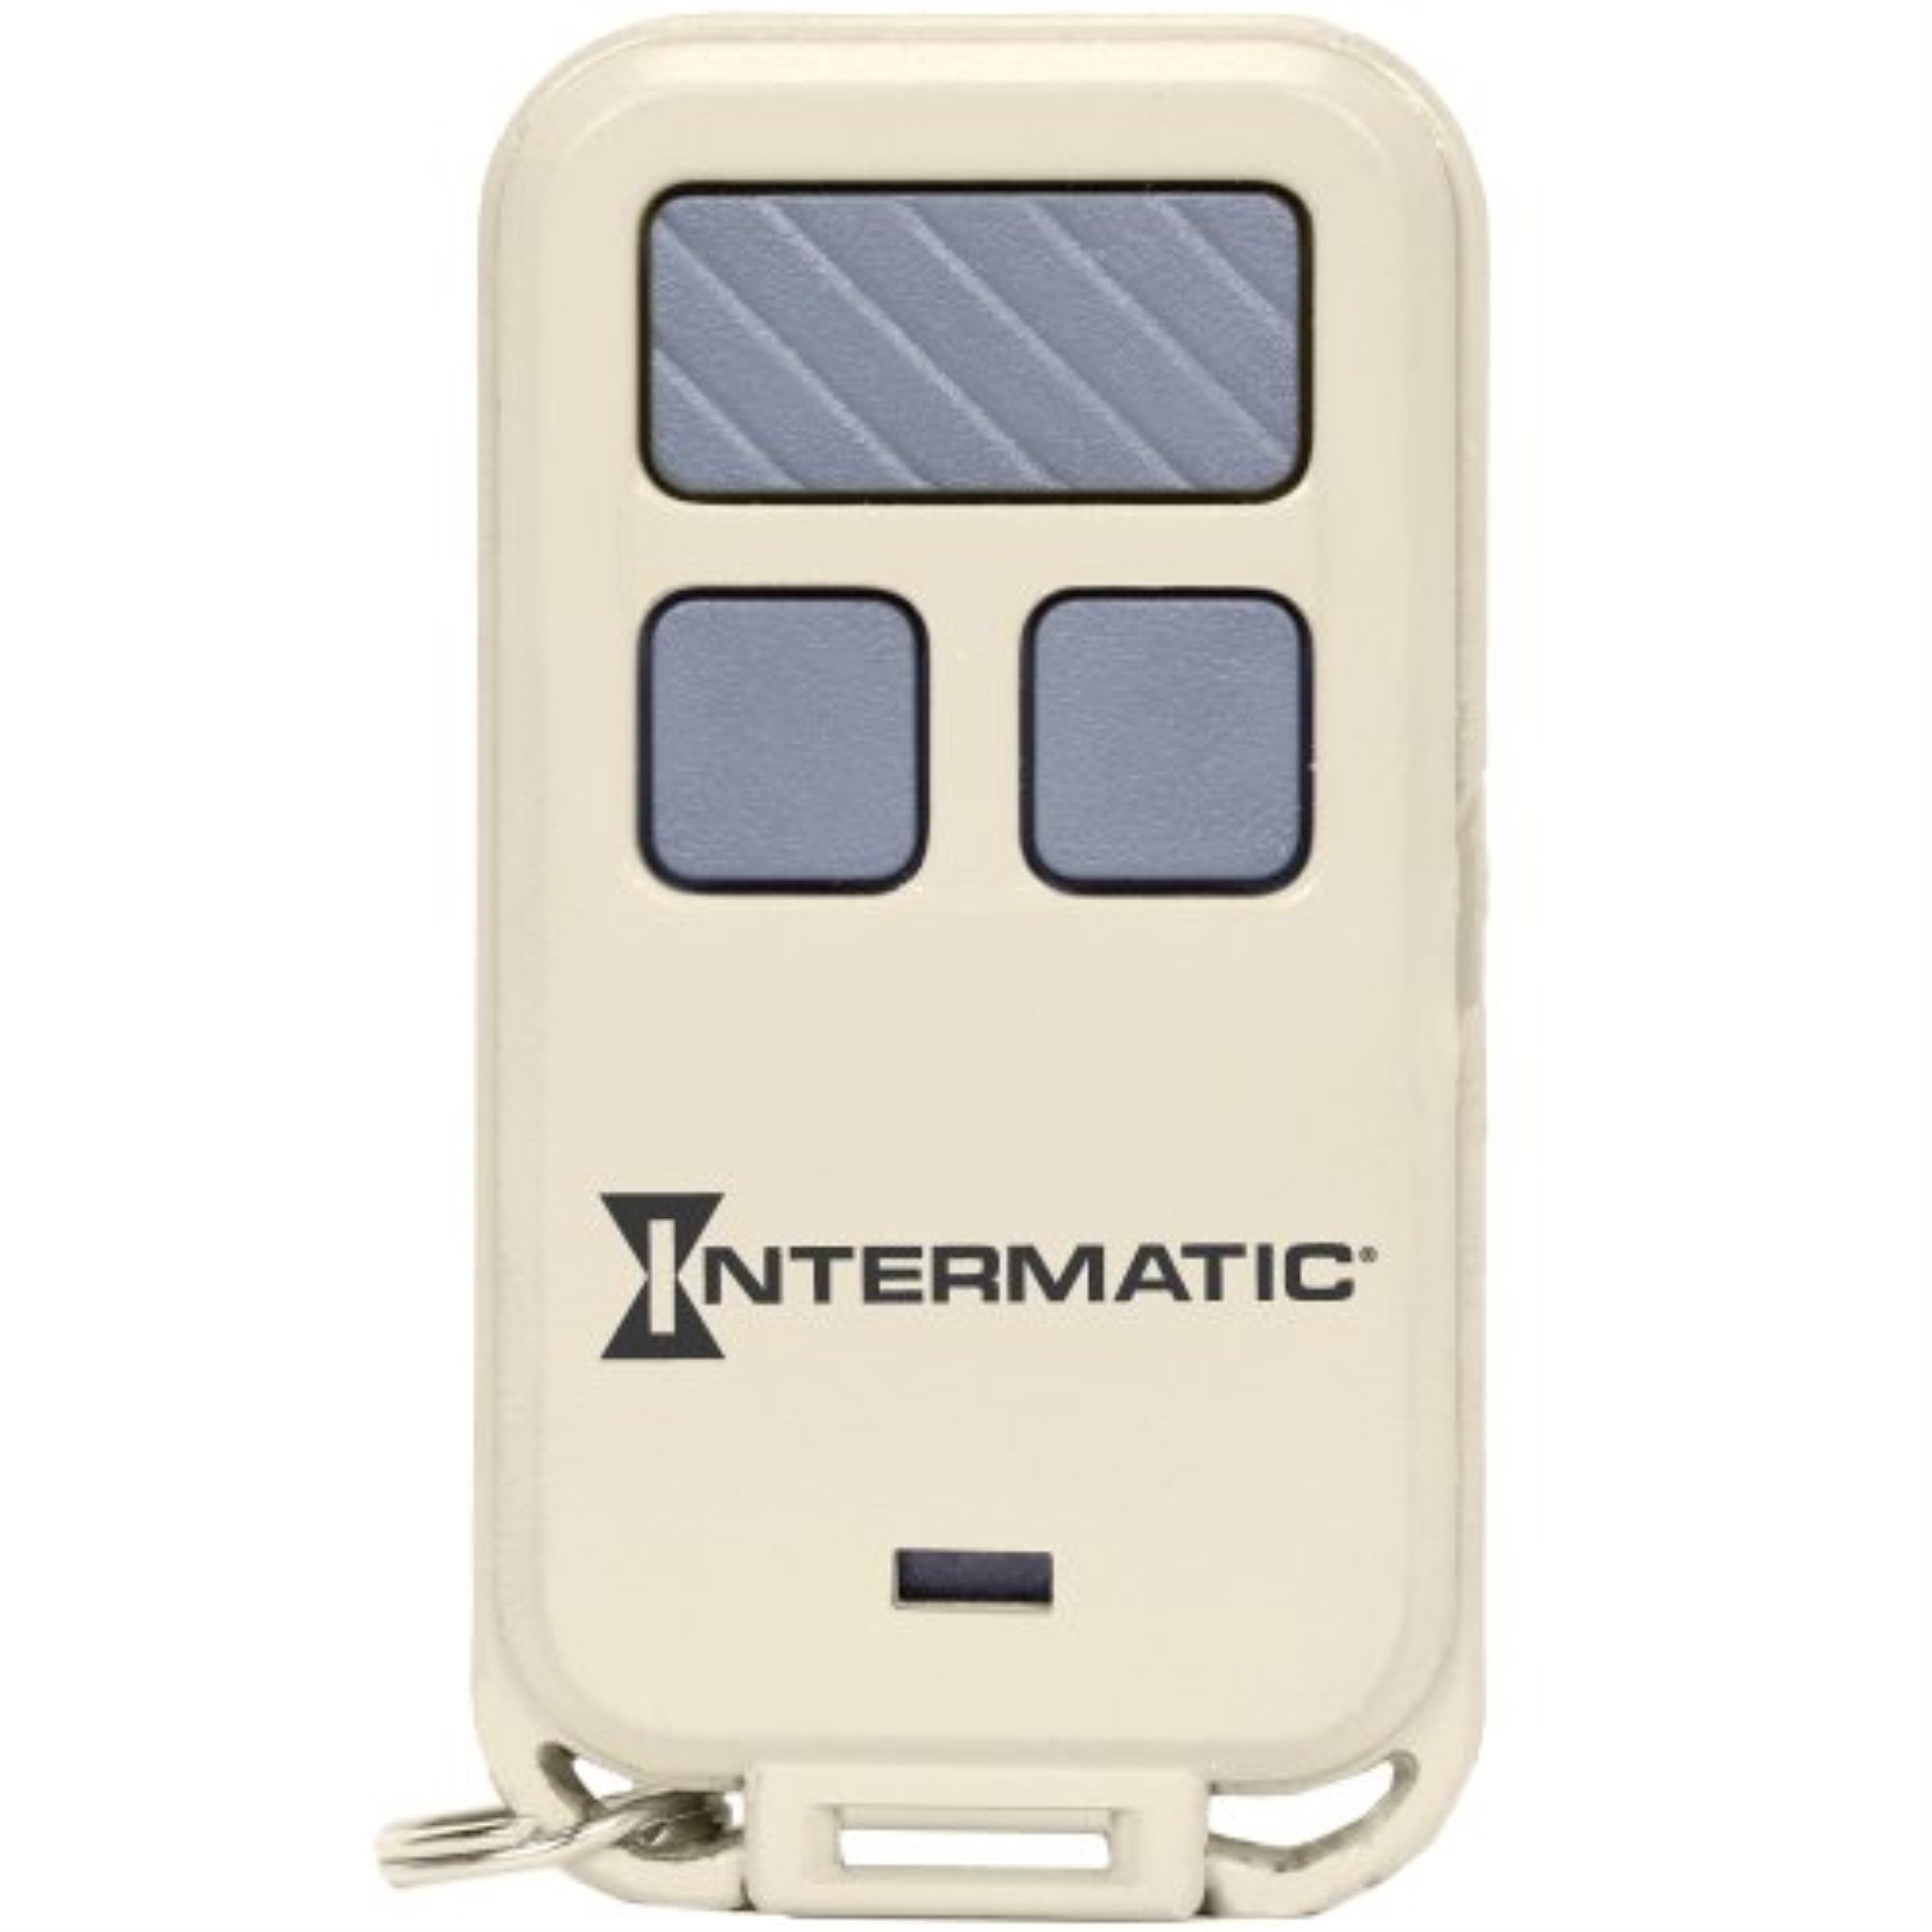 Intermatic RC939 3 Channel Radio Transmitter, Color